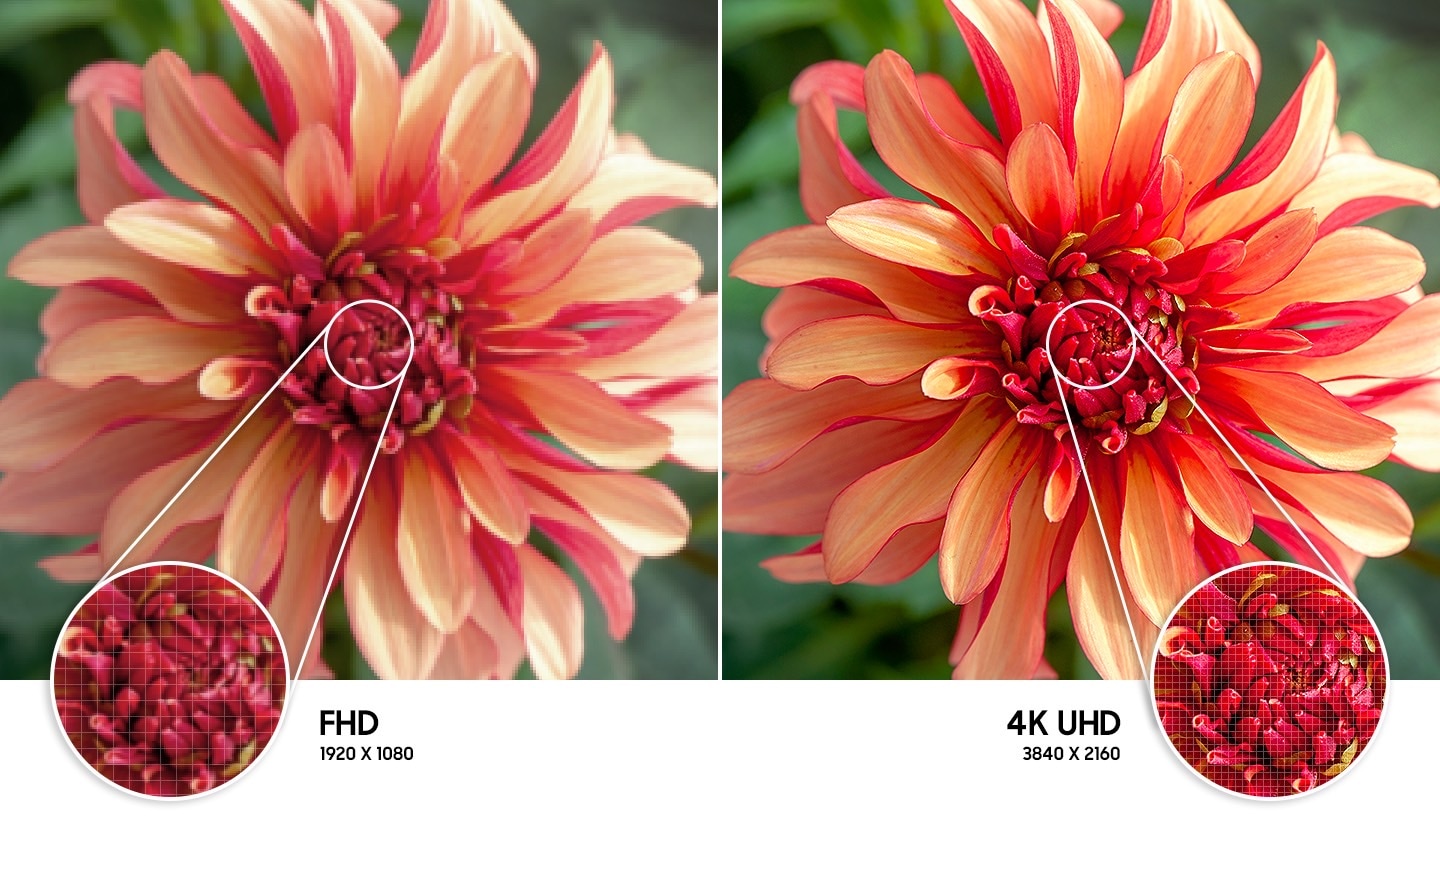 2717_ro-feature-feel-the-reality-of-4k-uhd-resolution-394767950.jpeg